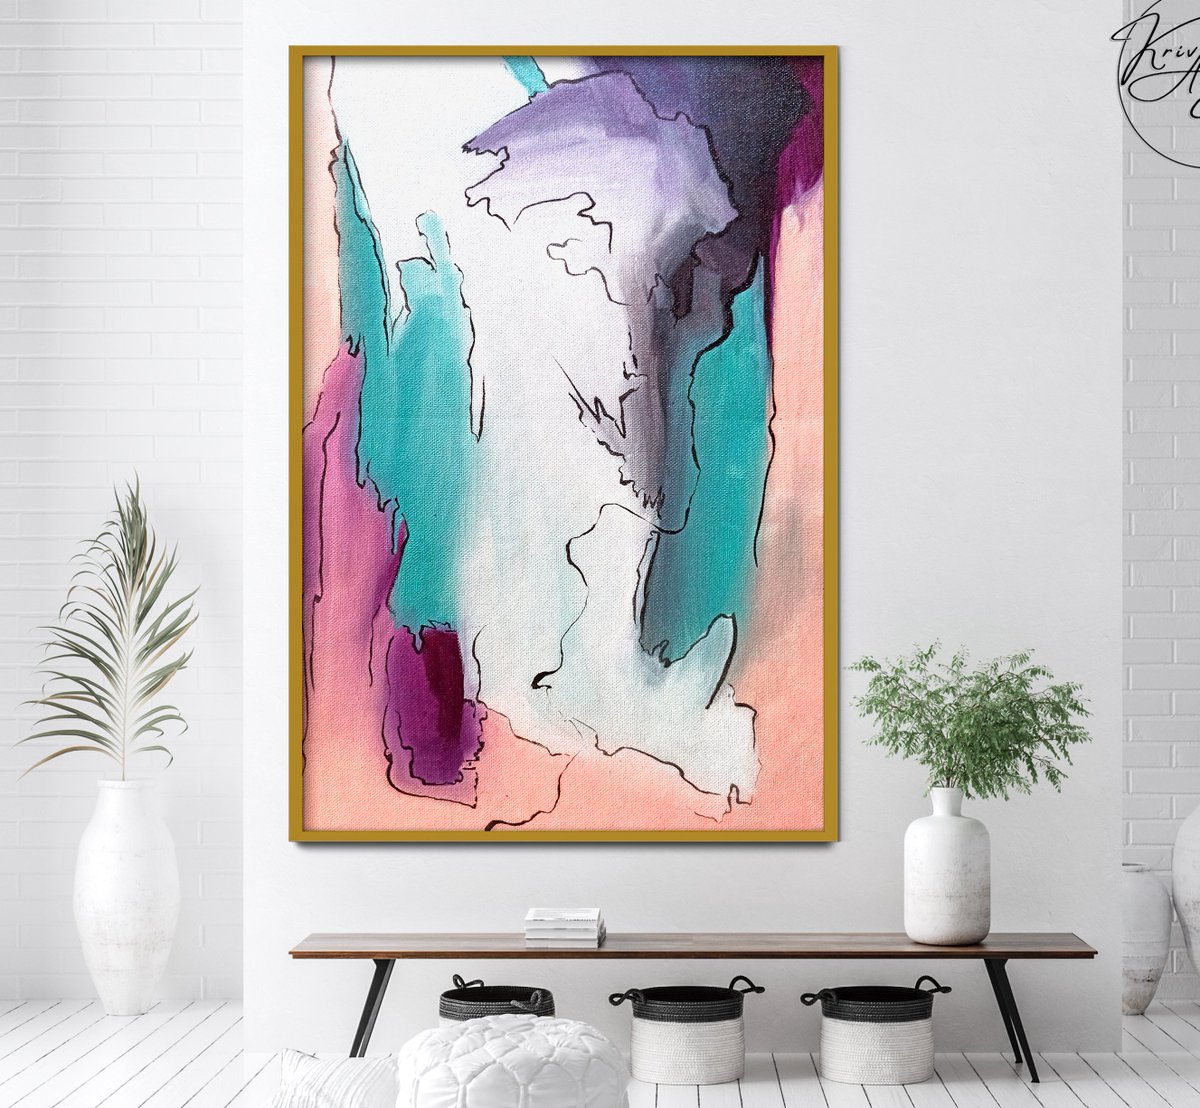 Brush Strokes Abstract Line Art For Home Decor Canvas Painting 
FREE Global Shipping Available, Purchase Here
krivaarthouse.etsy.com/uk/listing/149…

#abstractpaintings #lineart #brushstrokesart #canvasartpainting #homedecorwallart #homedecooration #artworkforhome #abstractwallart #canvasart